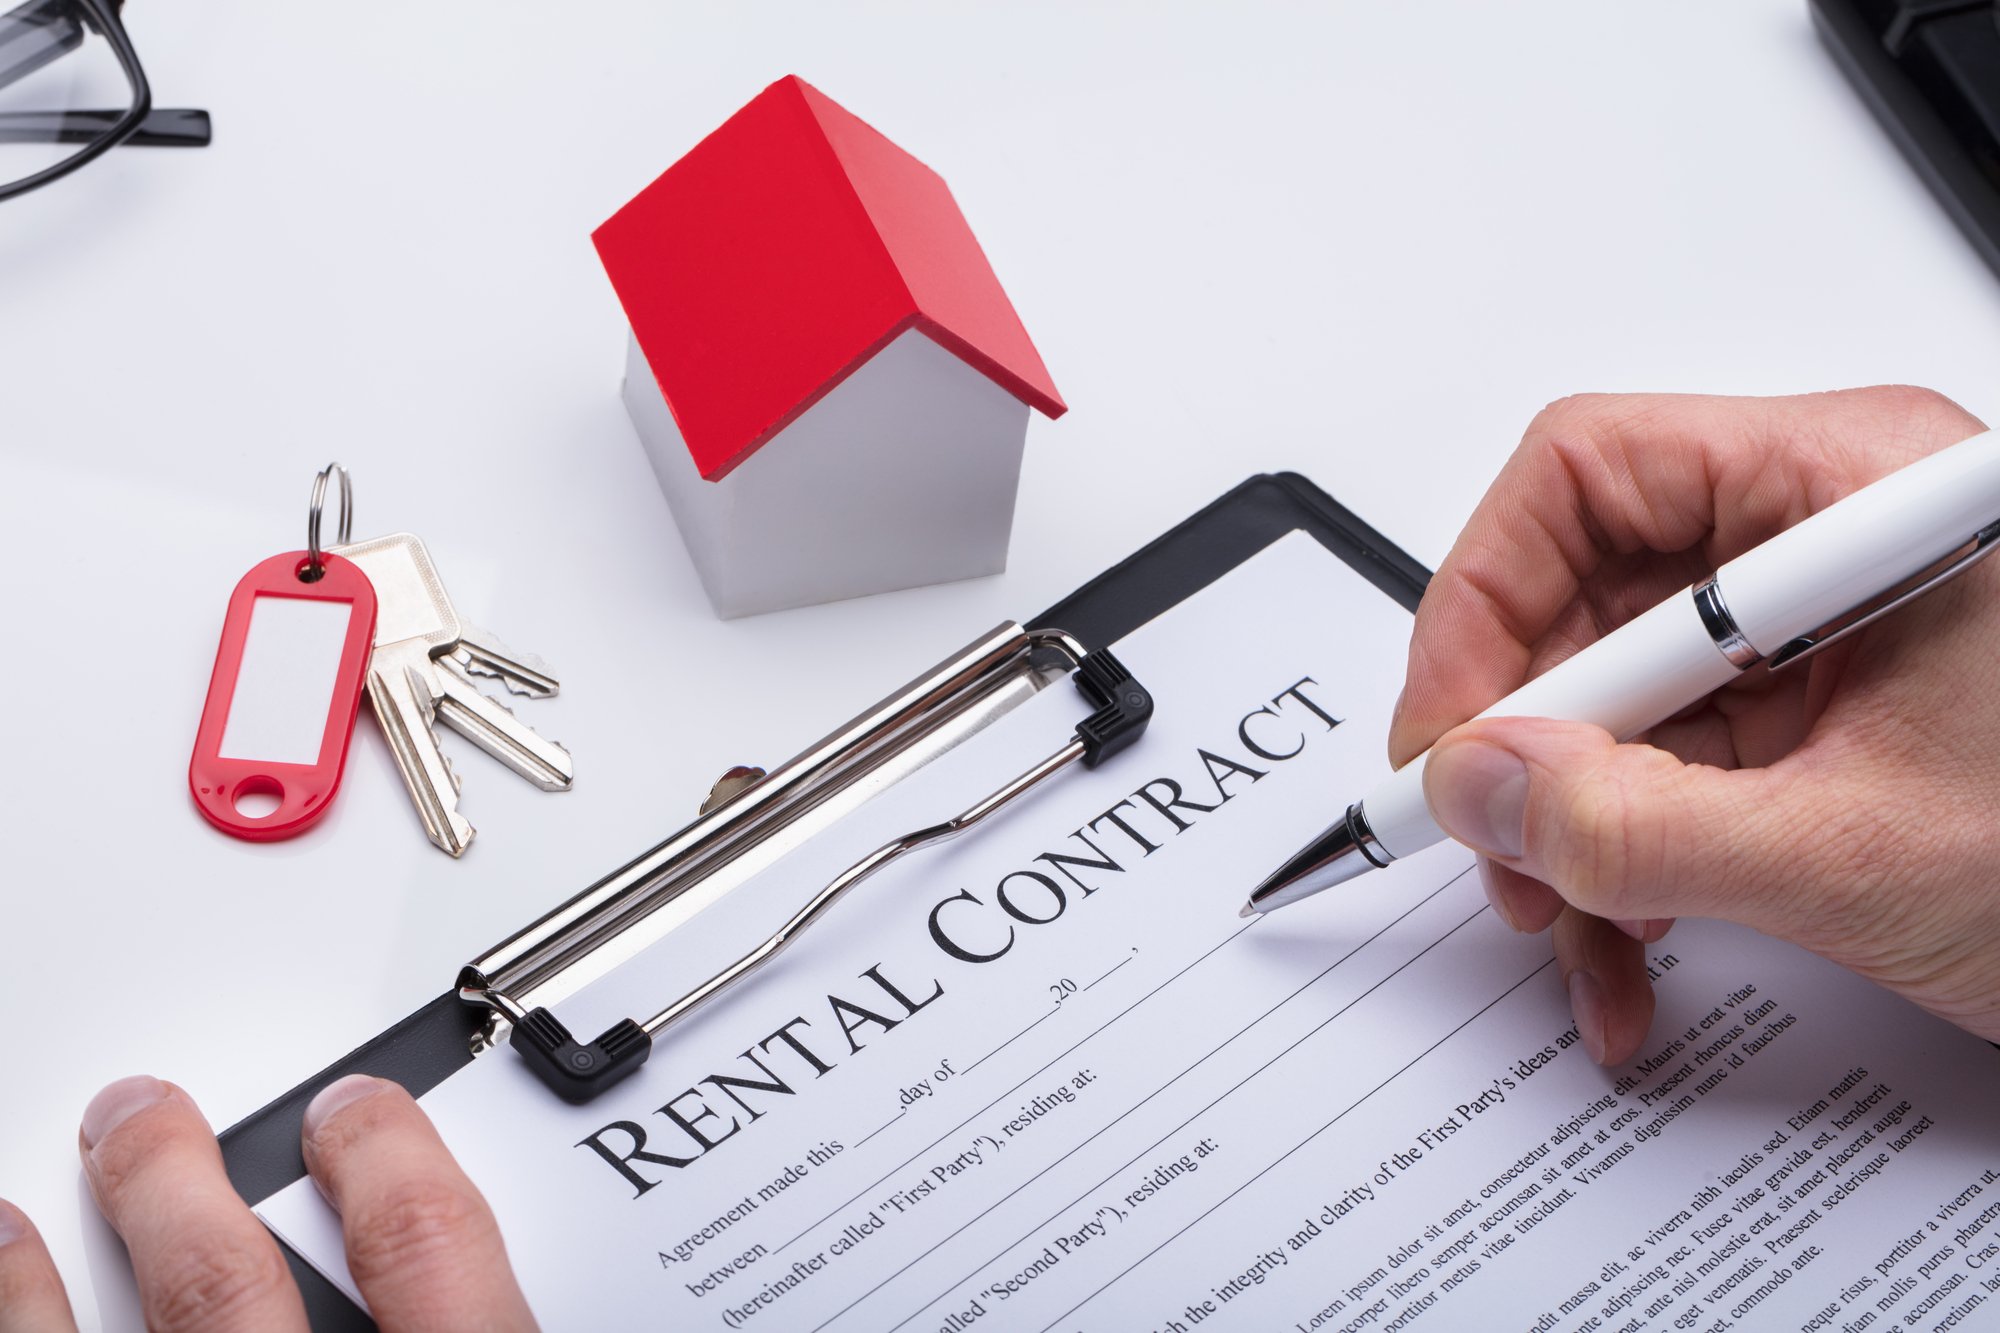 Rental Contract is being filled in with a white model house and a set of keys by its side - featured_image